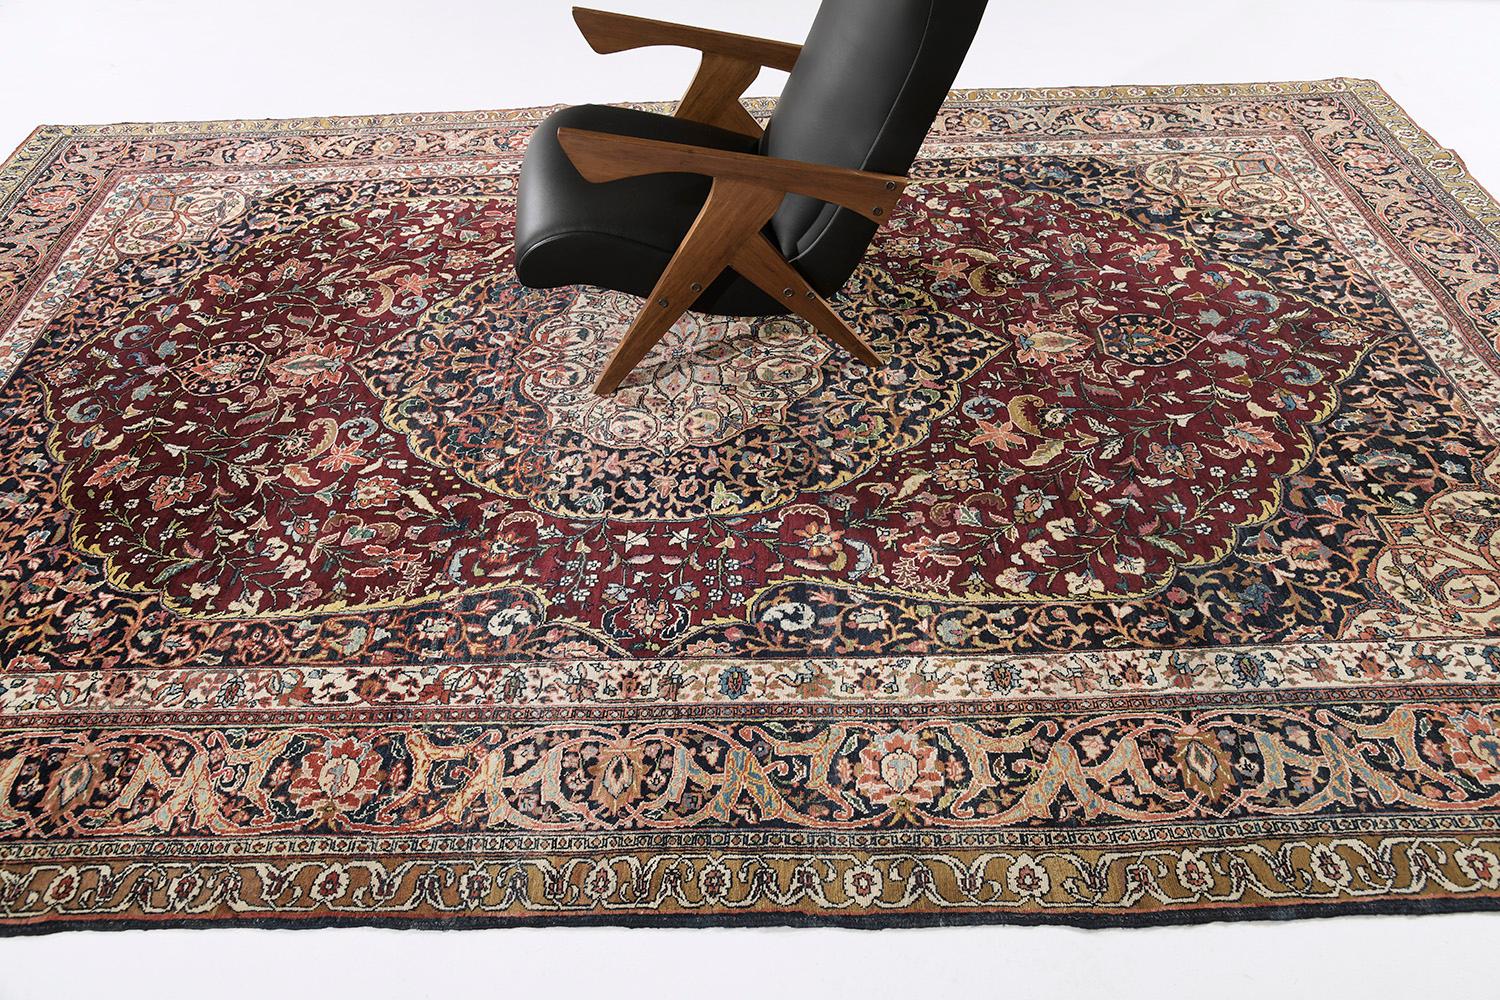 A breathtaking traditional Tabriz rug that gracefully establishes superior sophistication through botanical patterns of the blooming palmettes, leafy tendrils connected by graceful vines. Flanked by inner and outer botanical guard bands, this